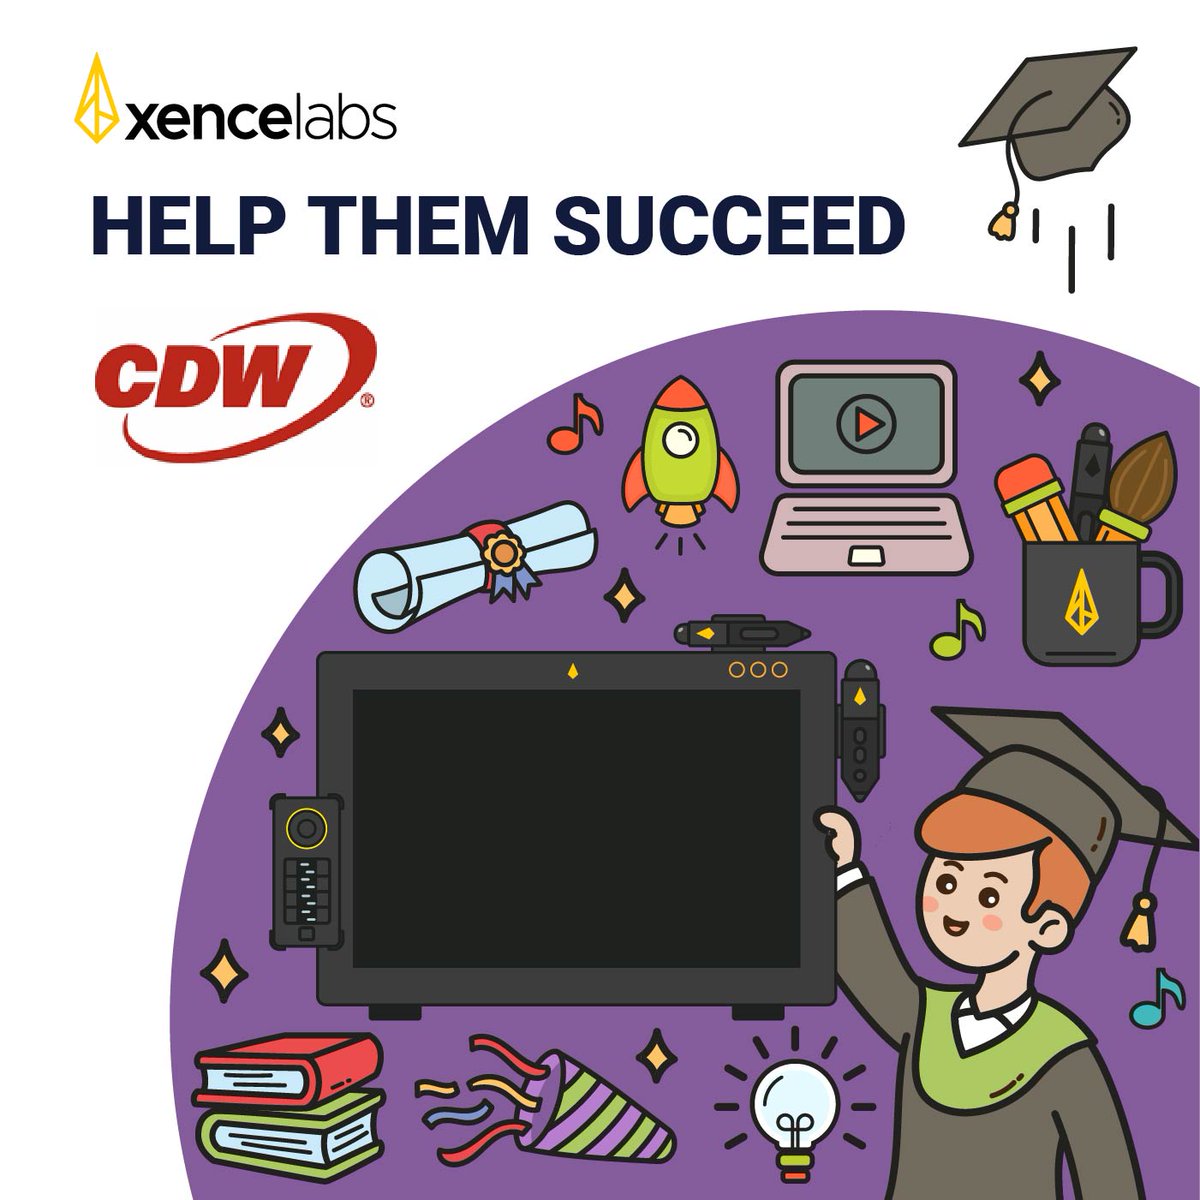 Helping your graduate reach their full potential in digital art and design starts with the gift of technology. #Xencelabs #PenDisplay24 is the ideal gift for the newly graduated digital #contentcreator in your life. Find us at #CDW! ow.ly/28UN50RiuhM